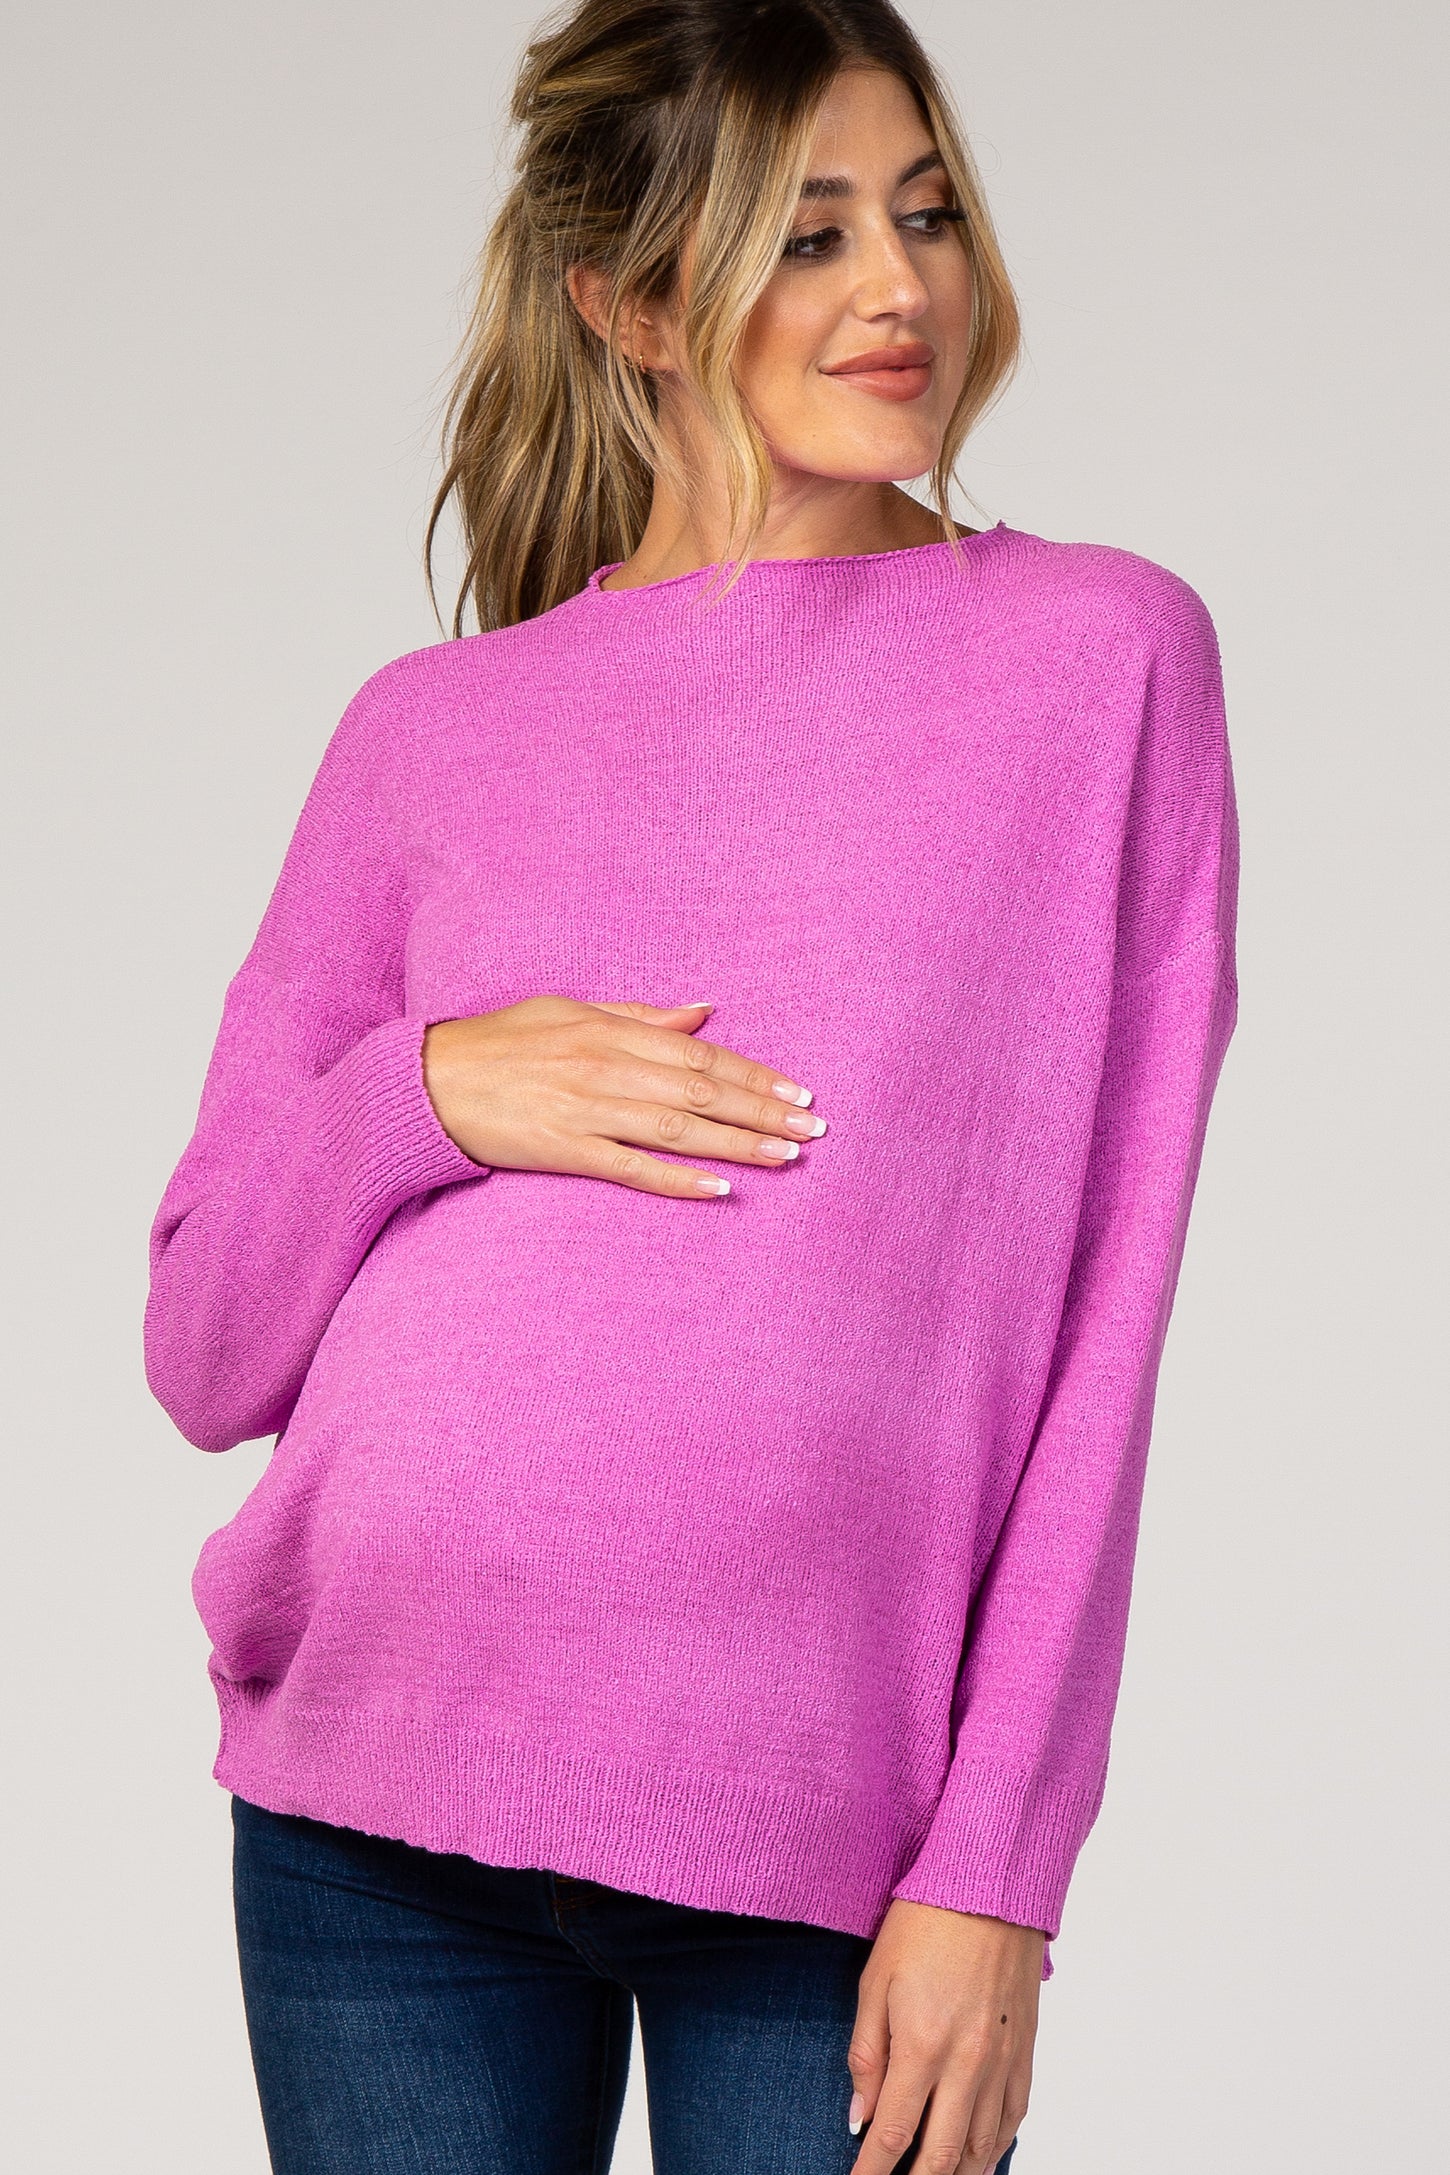 Pink Wide Neck Maternity Sweater